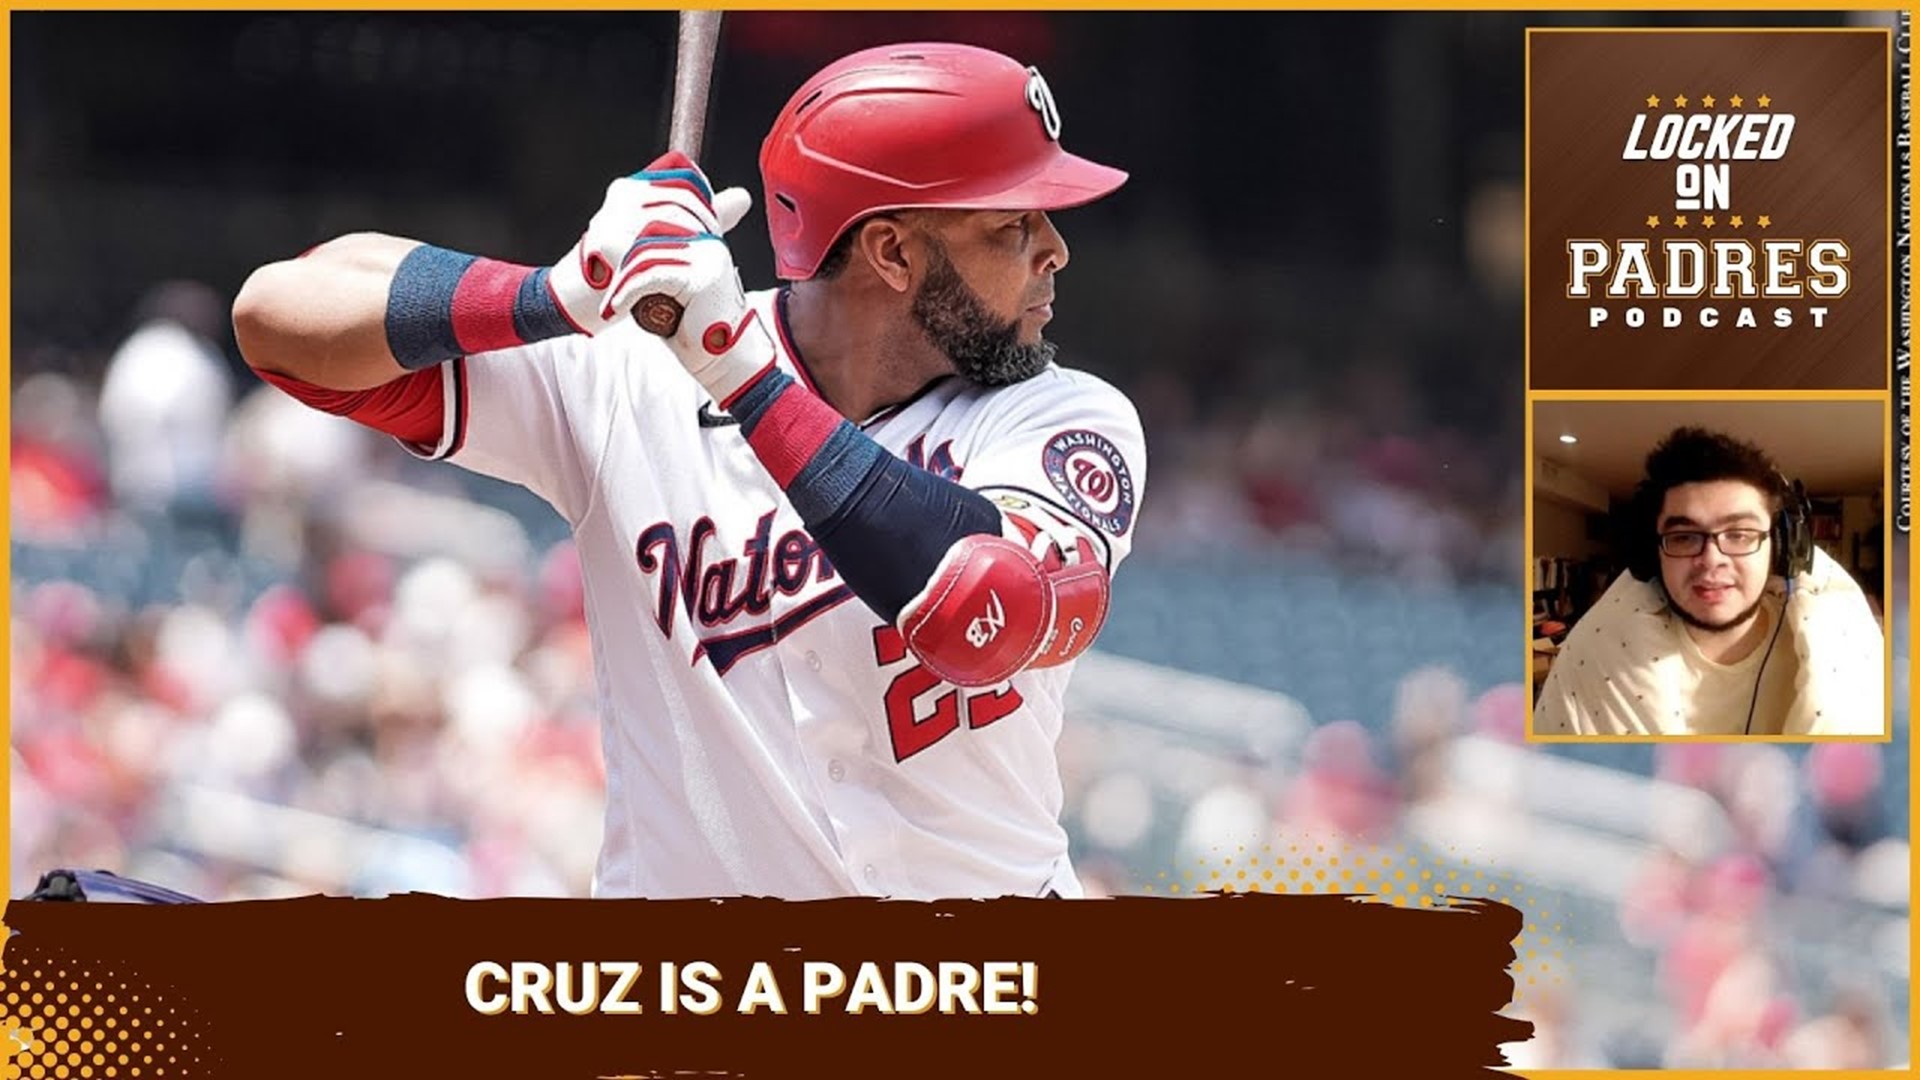 What Nelson Cruz brings to the San Diego Padres